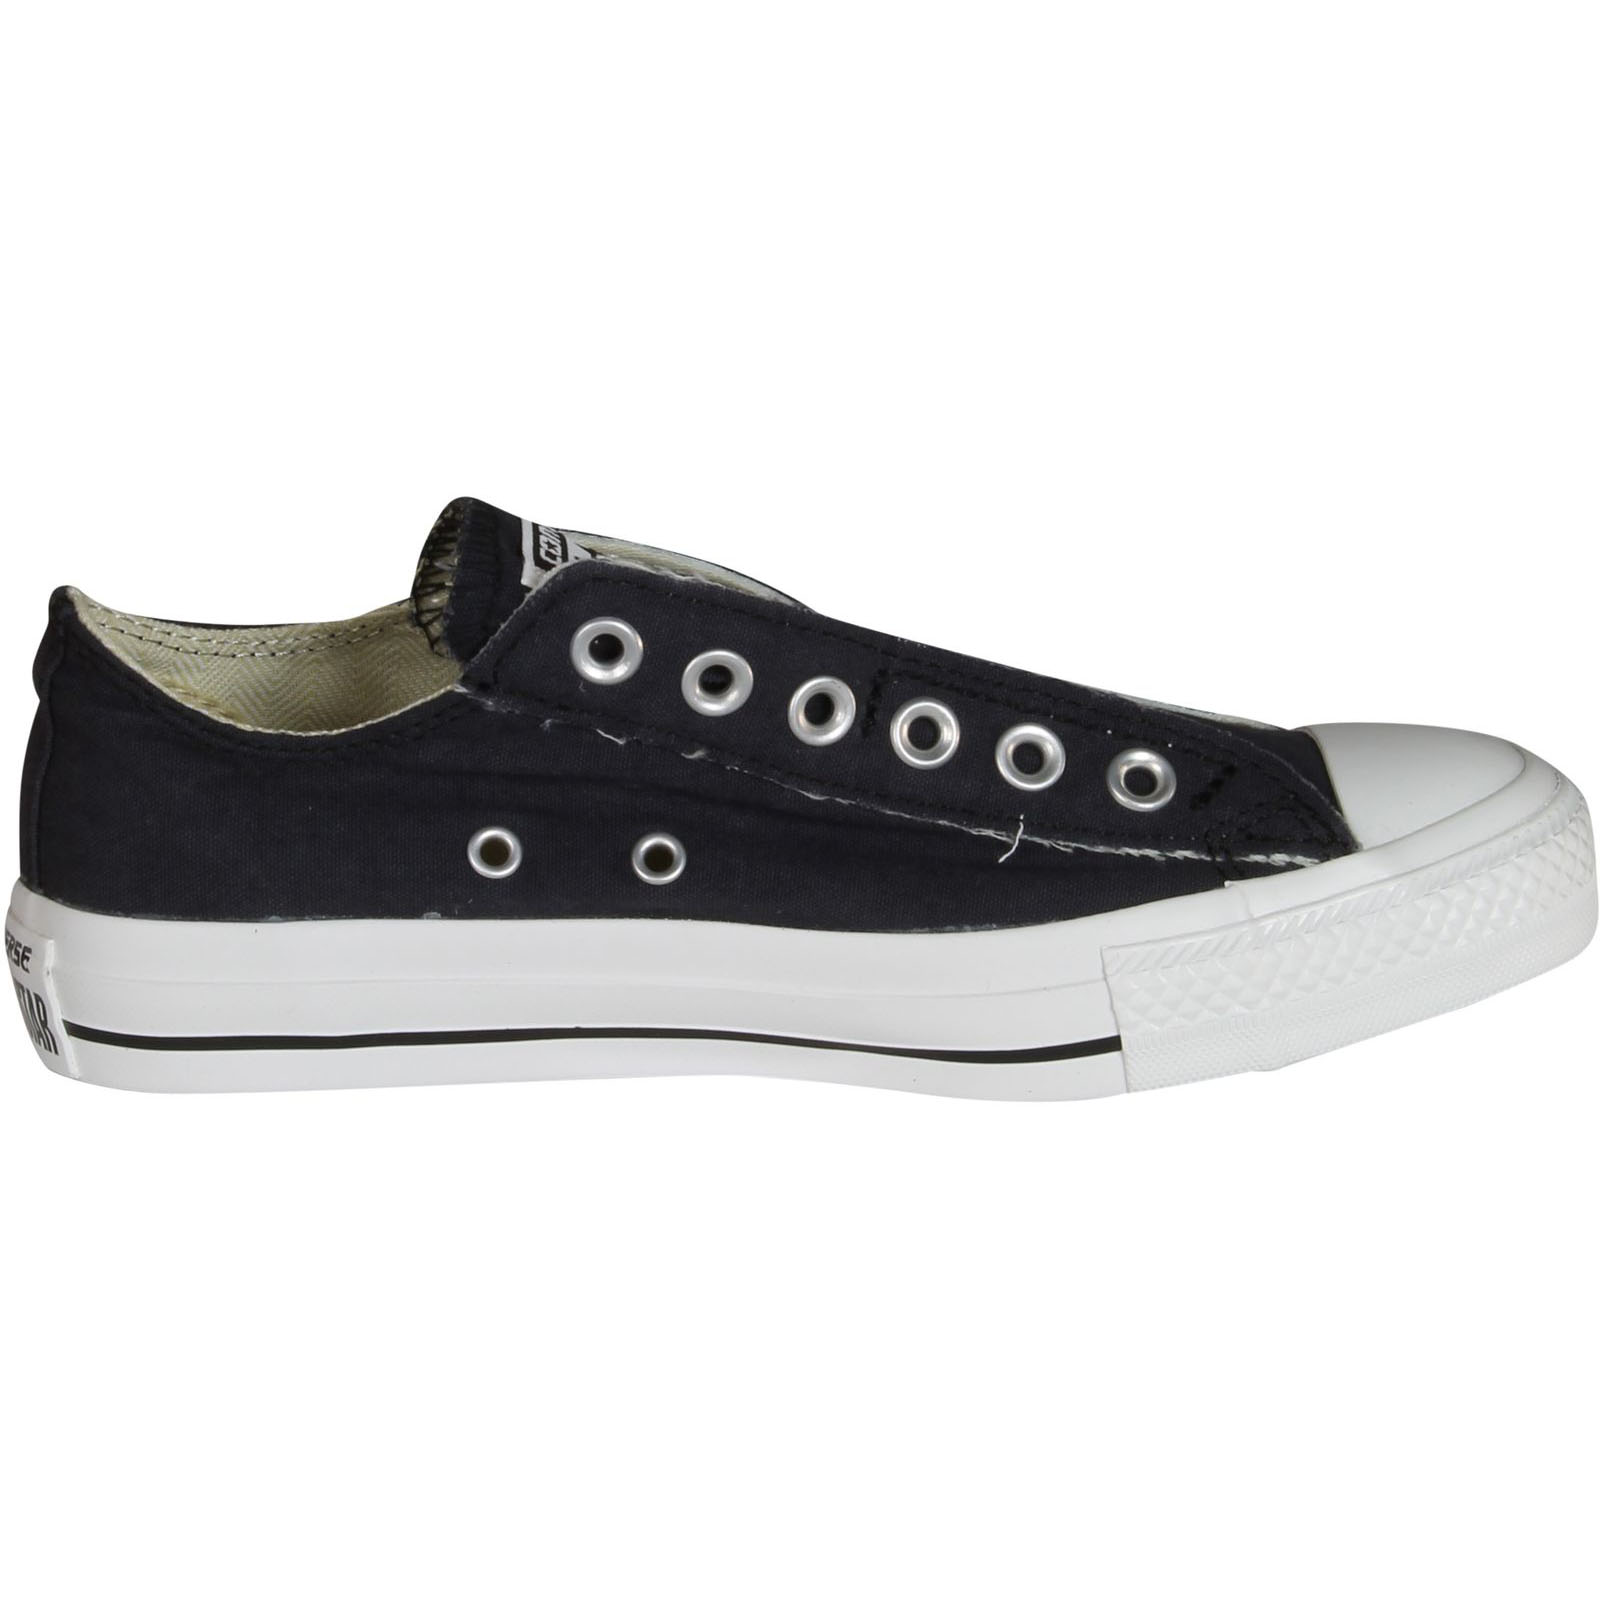 Converse Slip On Chuck Taylor - image 2 of 4